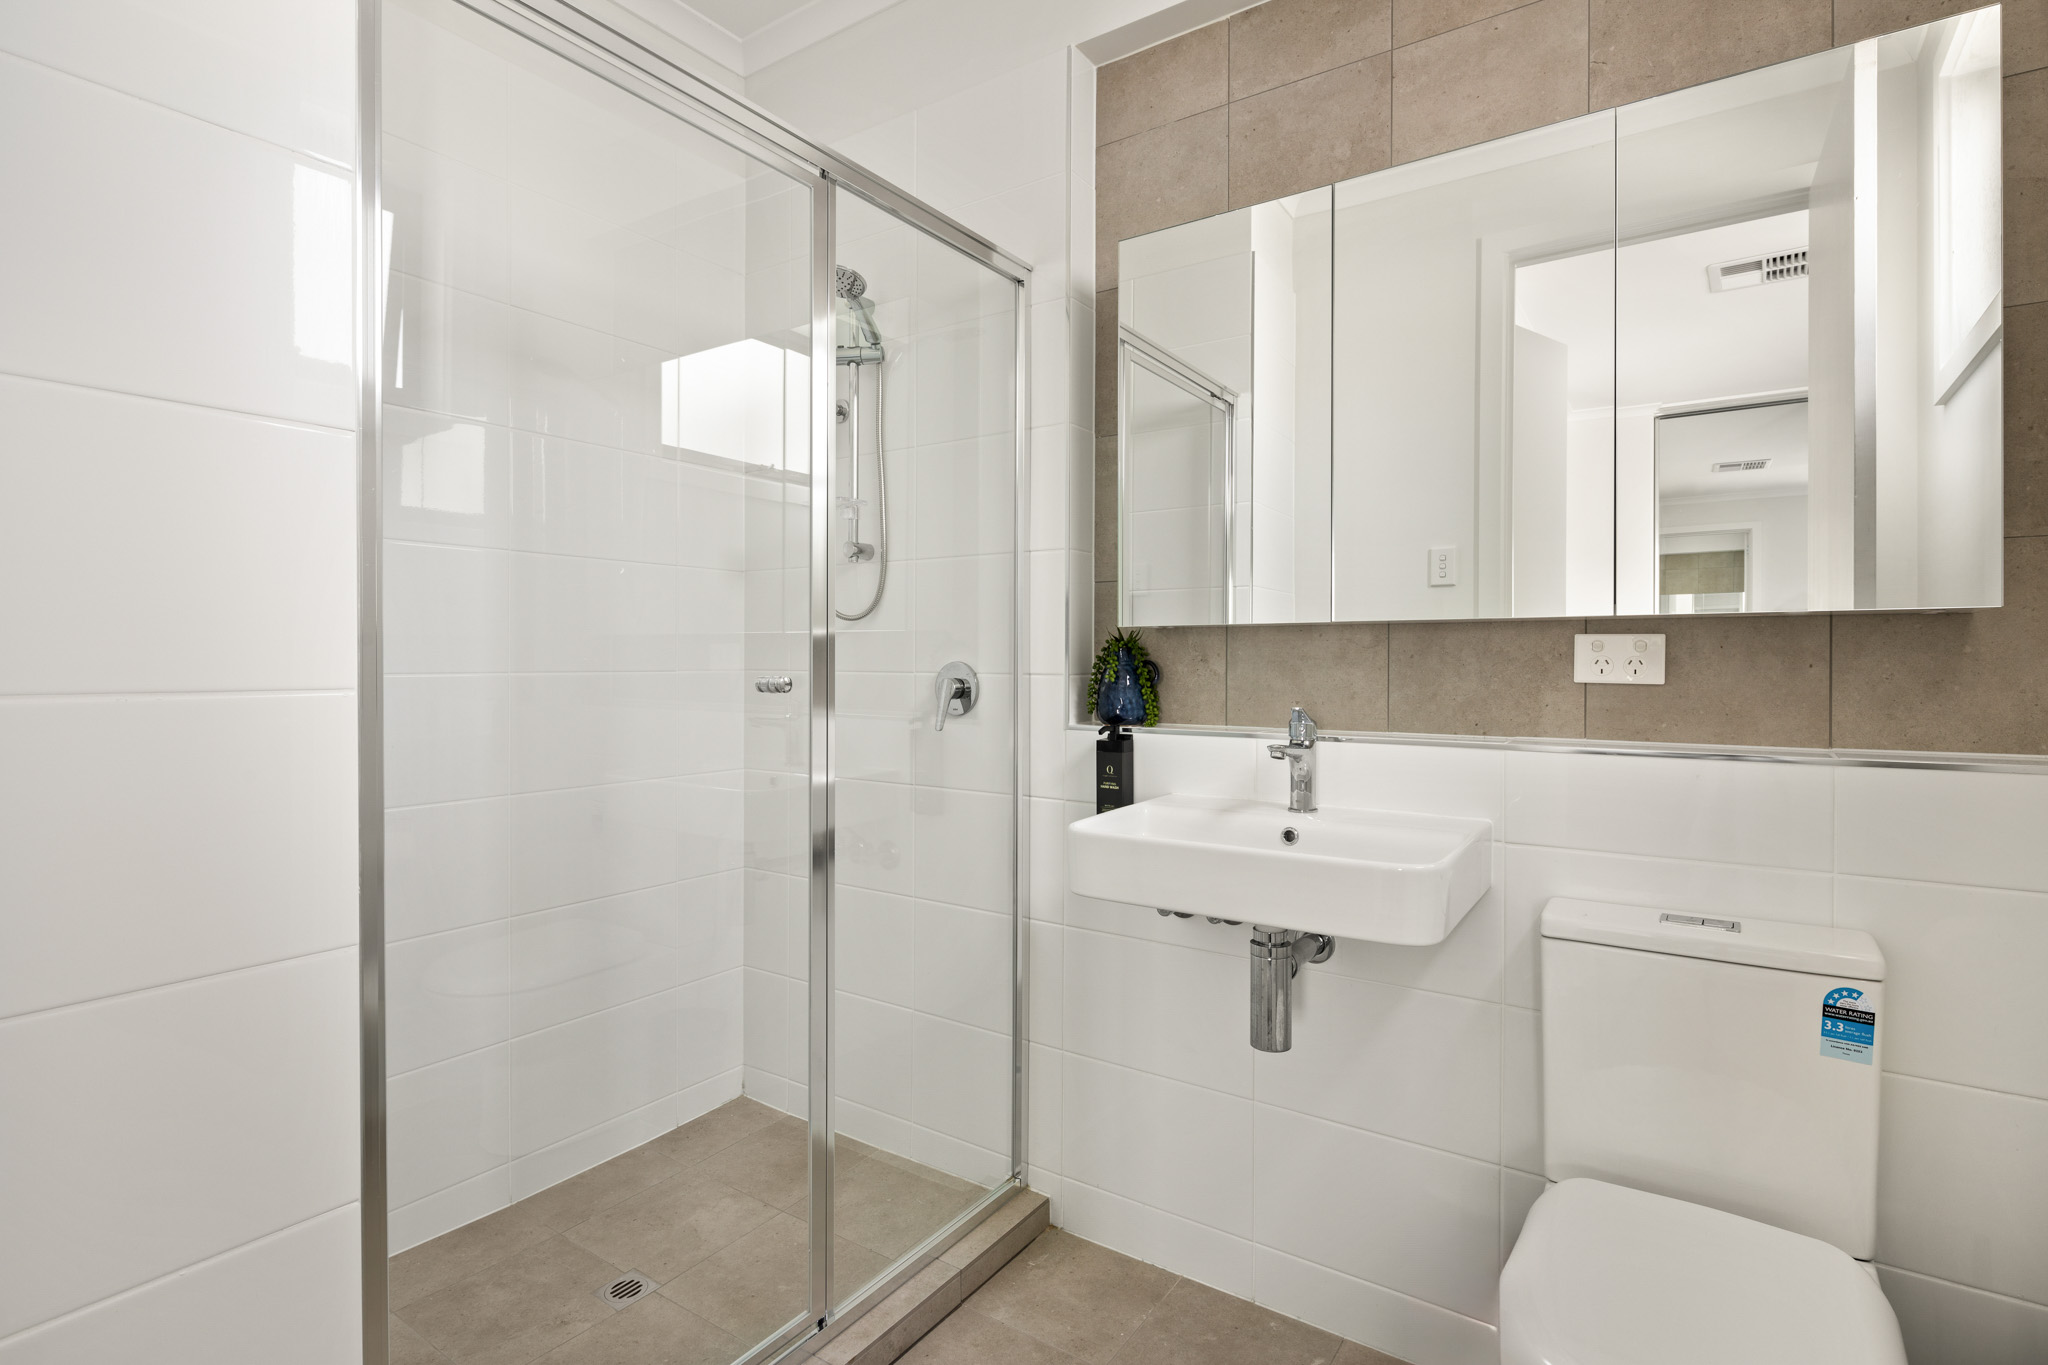 Bathroom - Two Bedroom Apartment - Urban Rest - Clare Street Apartments - Port Adelaide